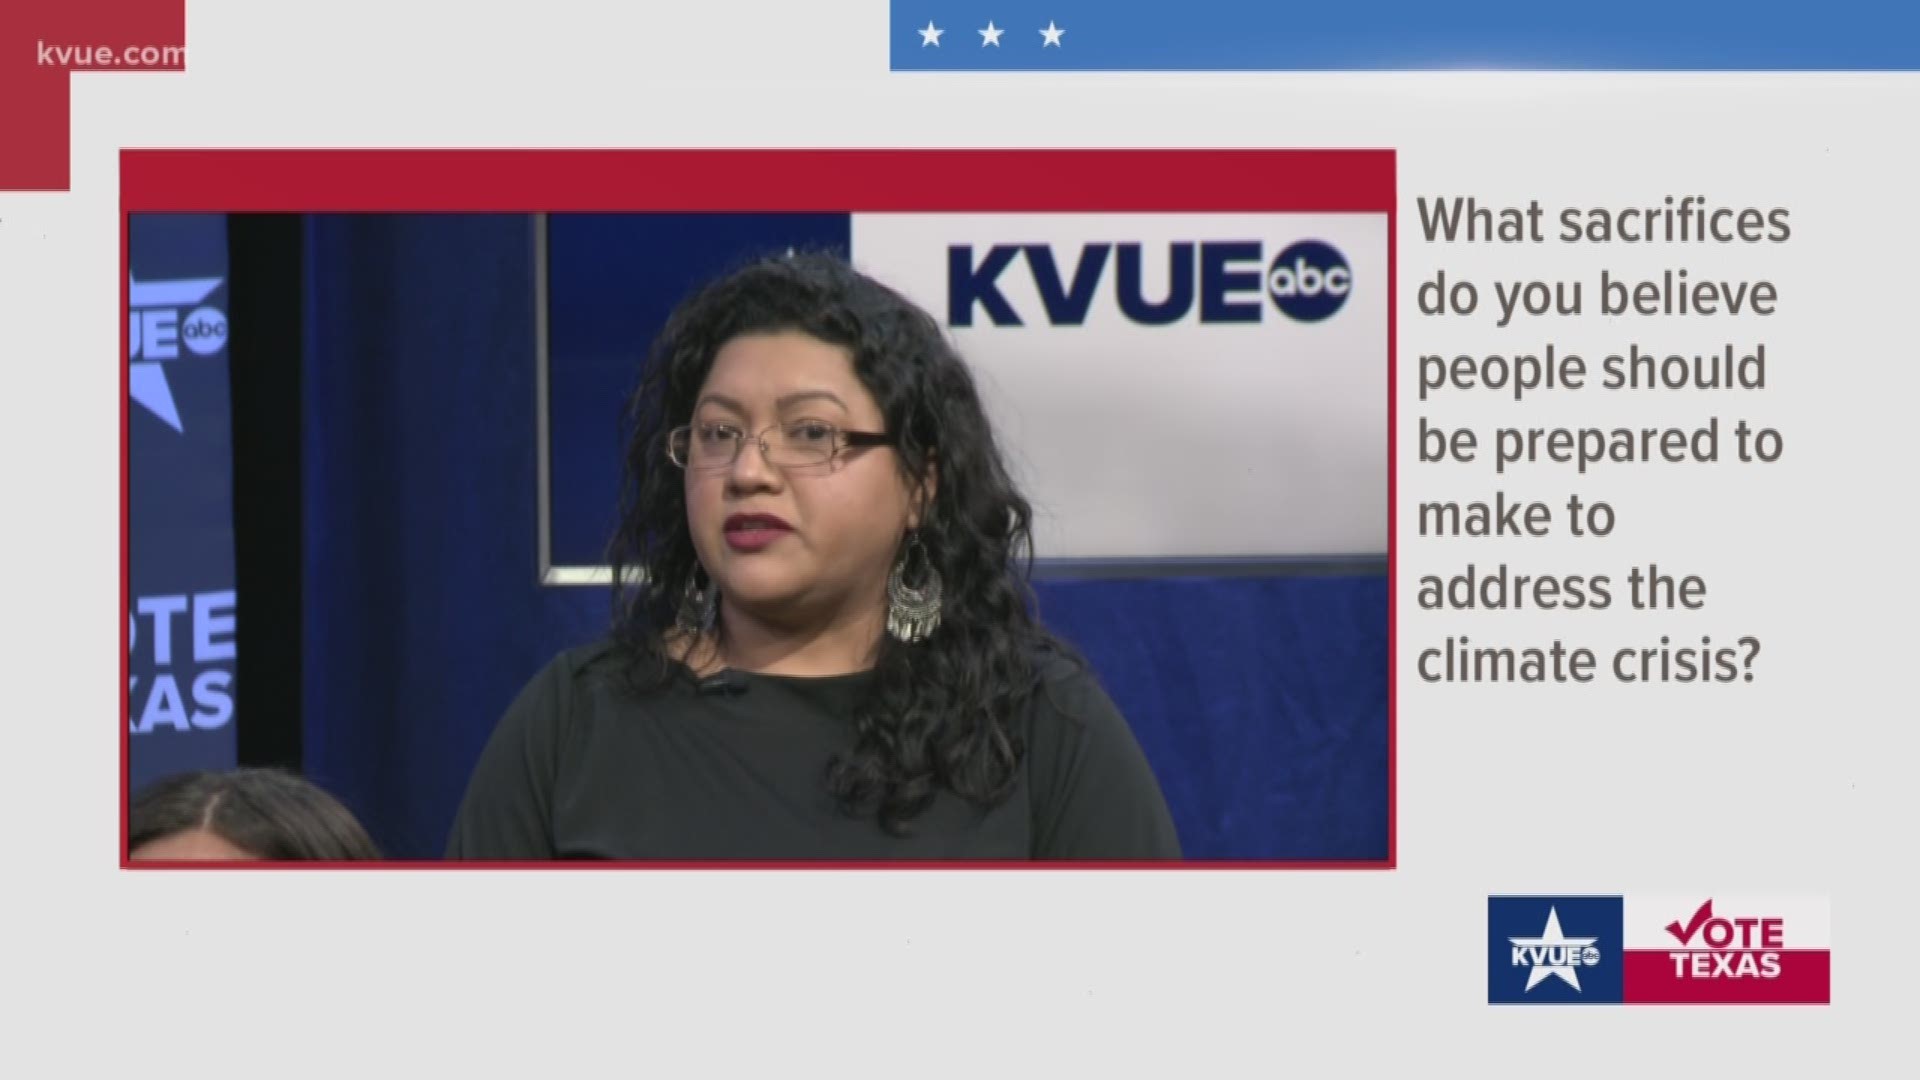 In Texas, which relies heavily on oil and gas, Sema Hernandez was asked what sacrifices people should be prepared to make to address climate change.